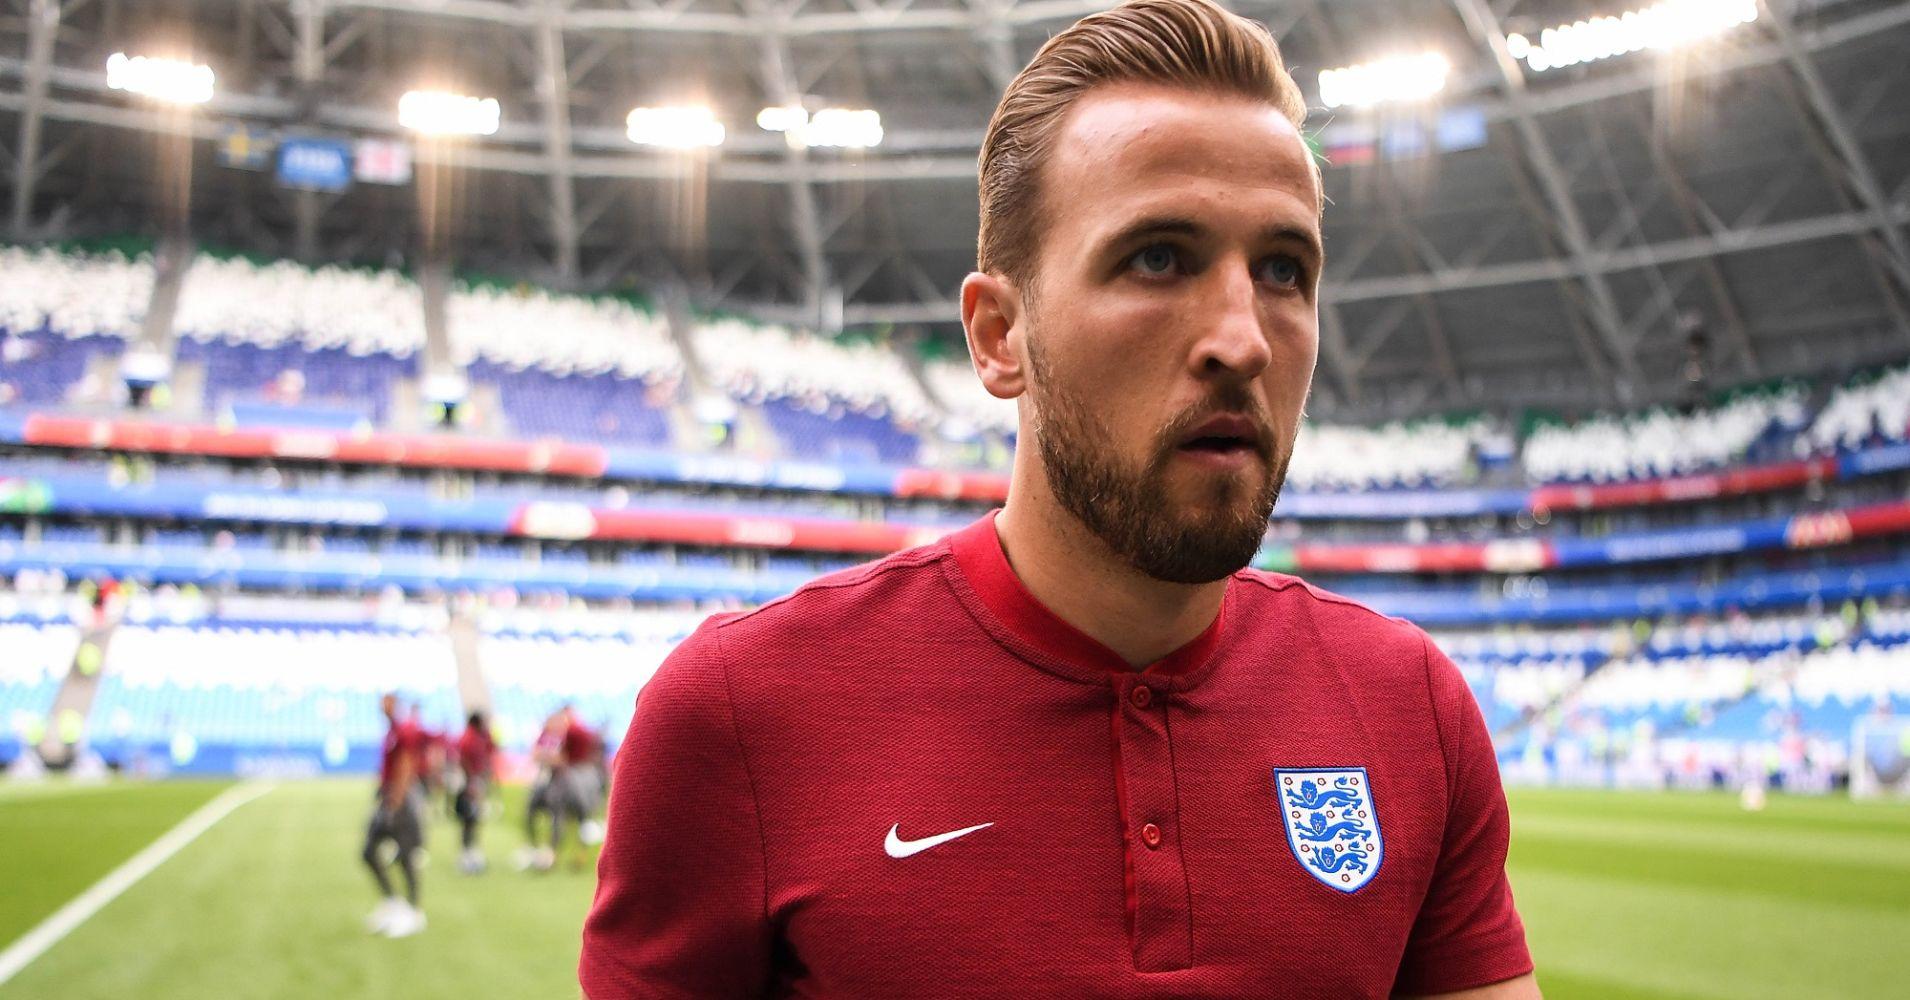 Here's How Much England's 24 Year Old Captain Harry Kane Earns